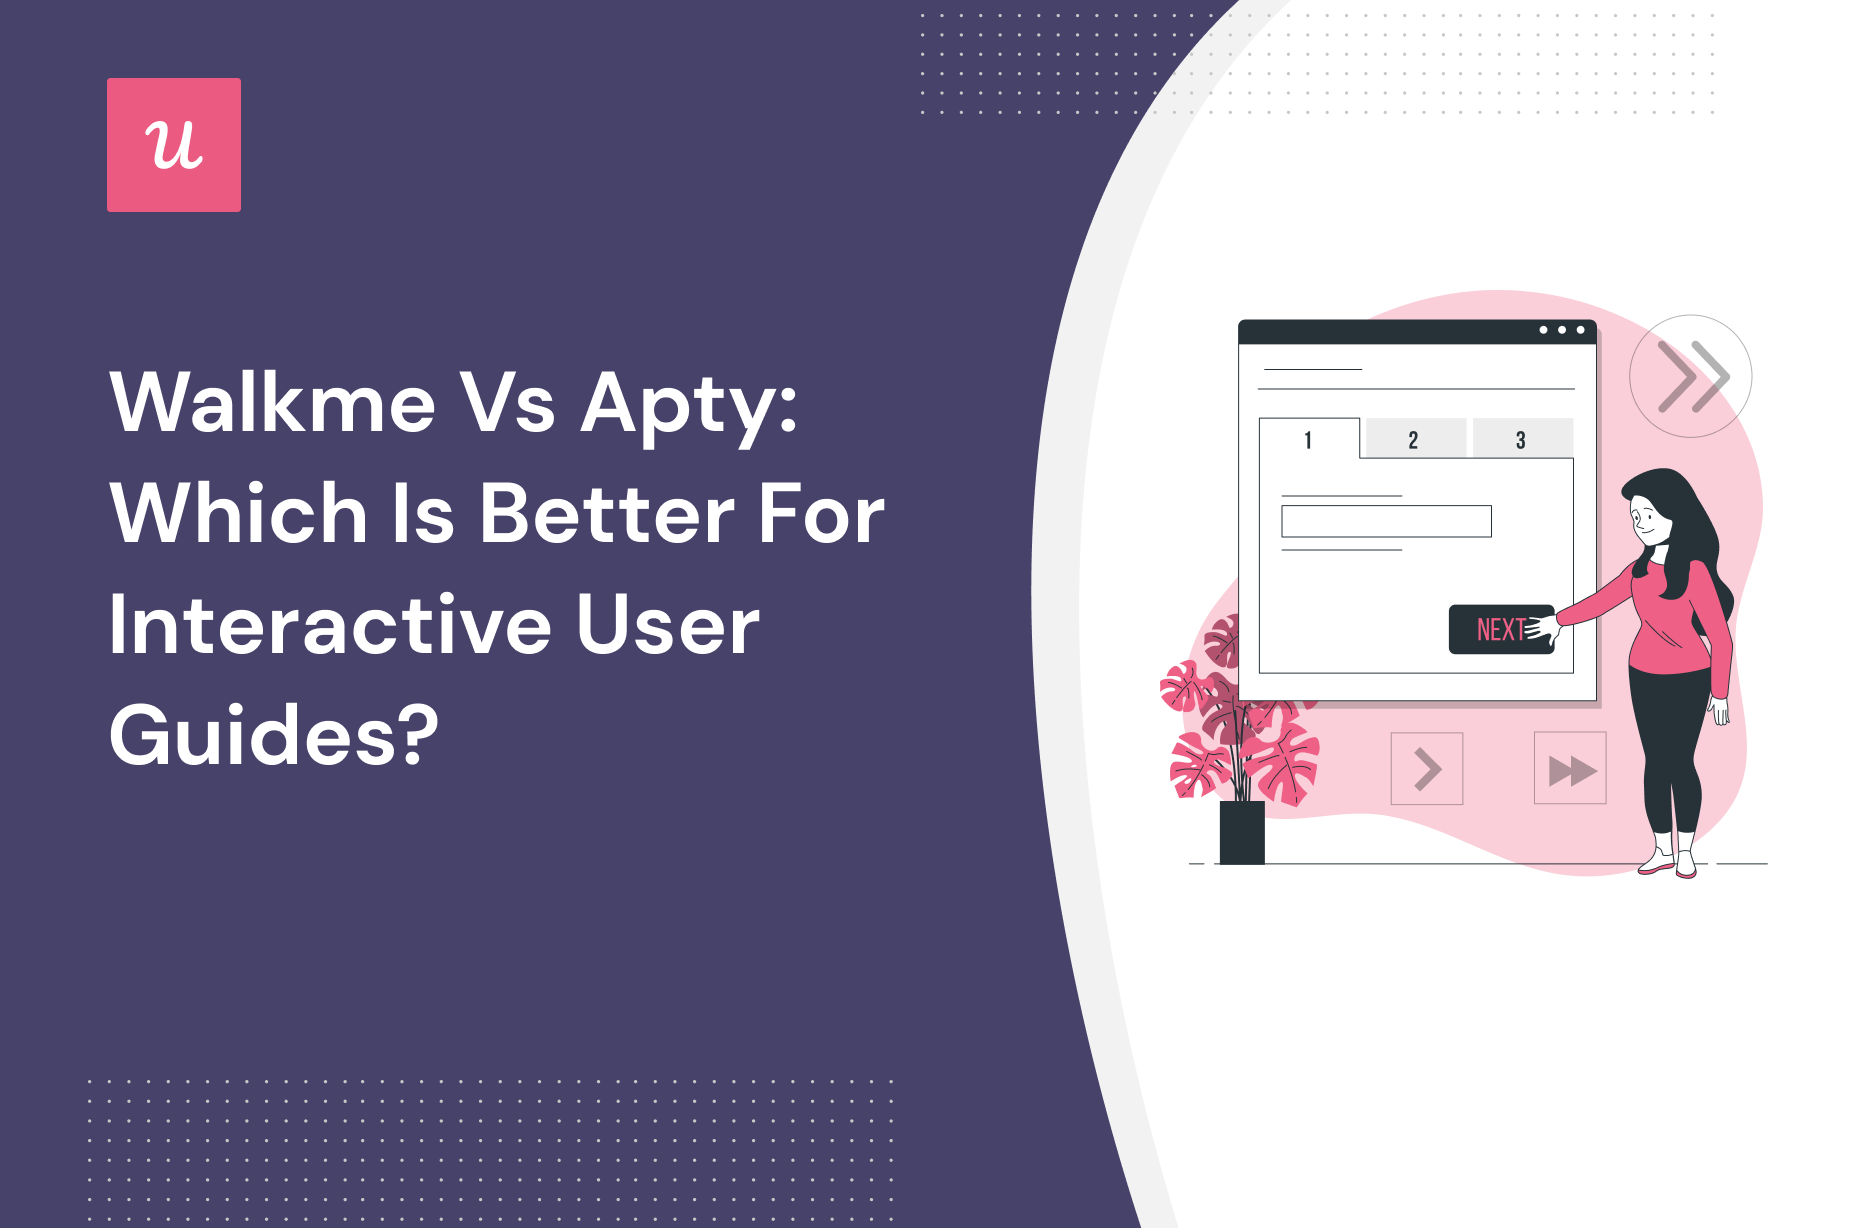 Walkme vs Apty: Which is Better for Interactive User Guides?